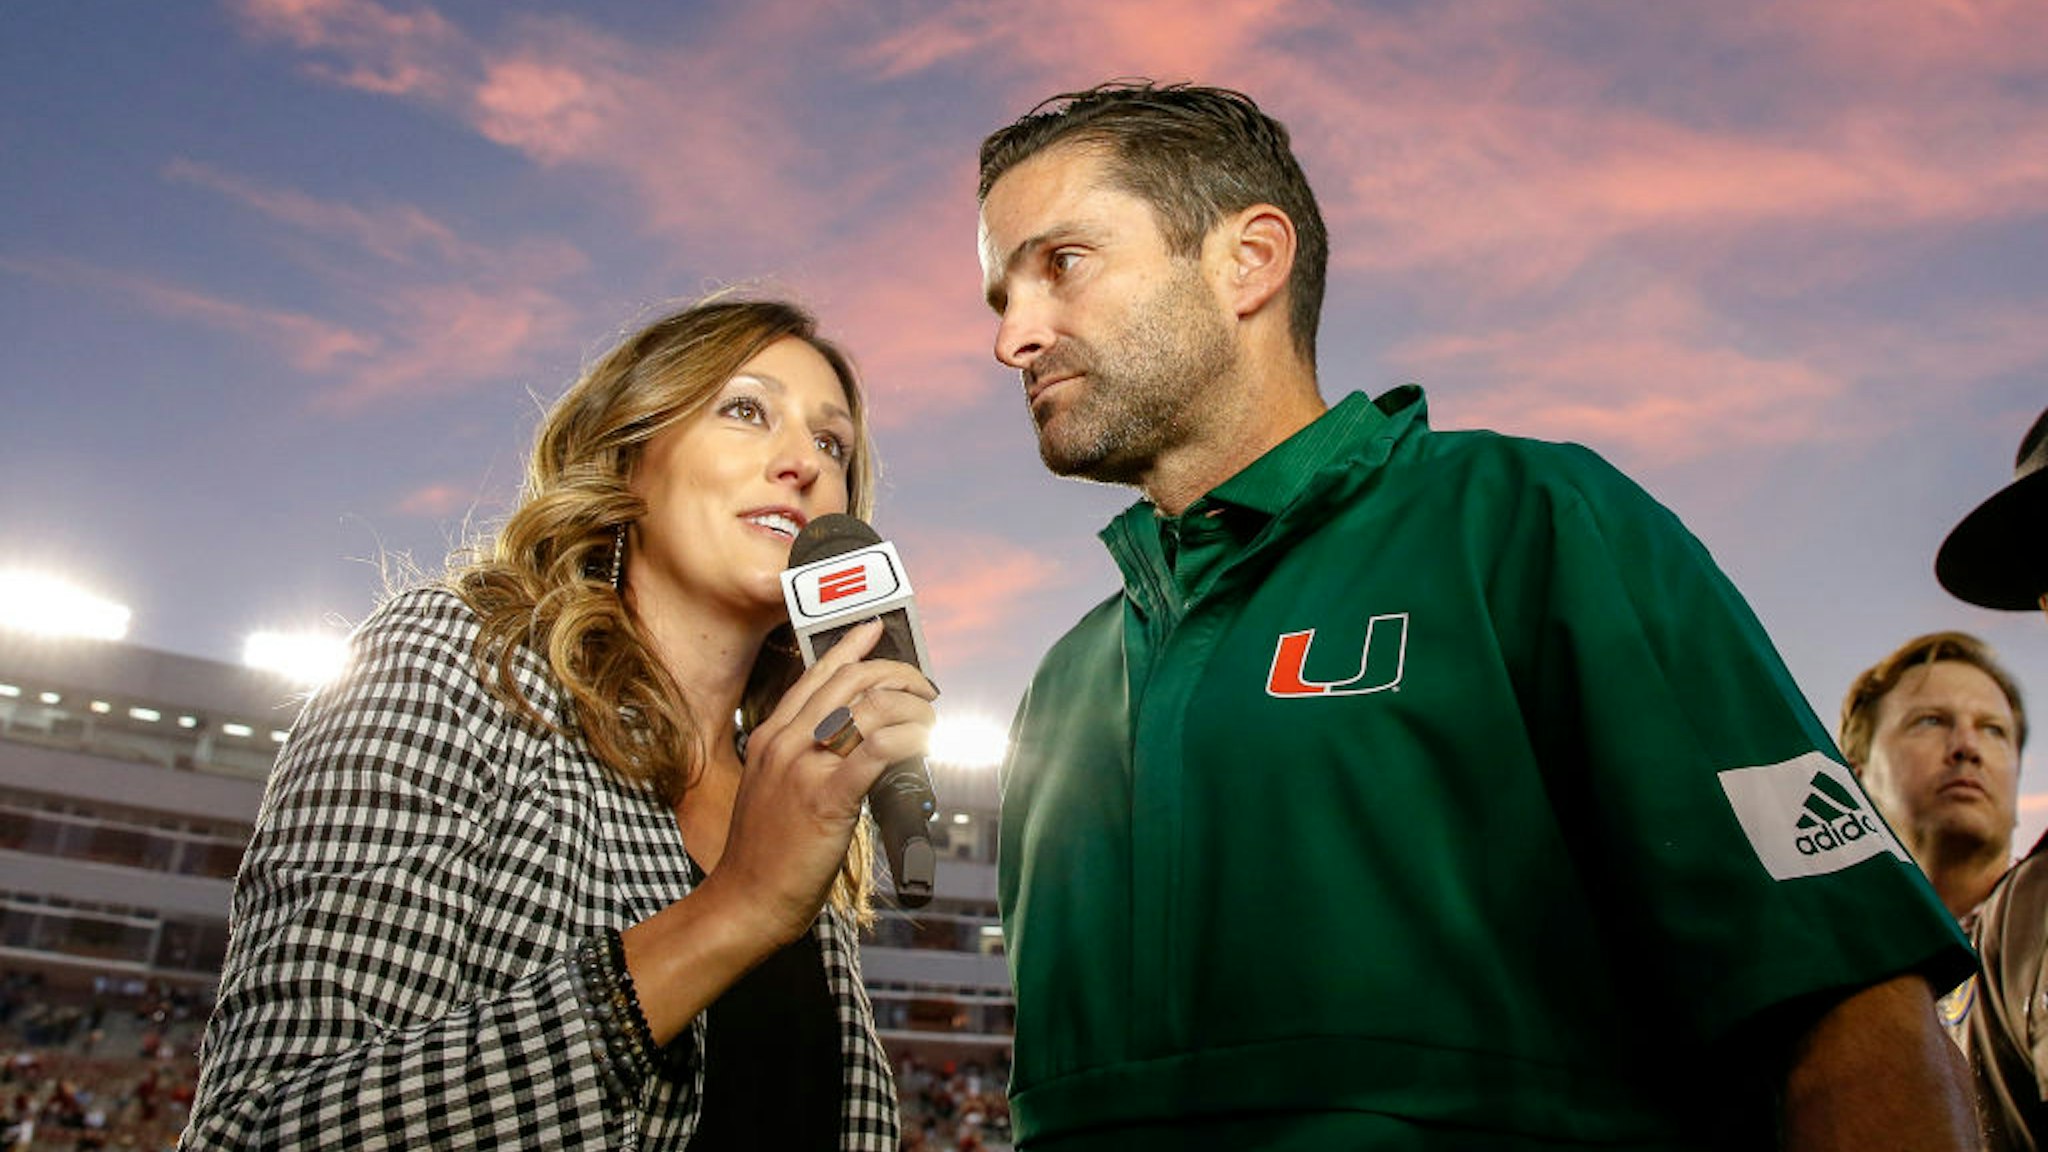 TALLAHASSEE, FL - NOVEMBER 2: ESPN Sideline Reporter Allison Williams interviews Head Coach Manny Diaz of the Miami Hurricanes after the game against the Florida State Seminoles at Doak Campbell Stadium on Bobby Bowden Field on November 2, 2019 in Tallahassee, Florida. Miami defeated Florida State 27 to 10. (Photo by Don Juan Moore/Getty Images)